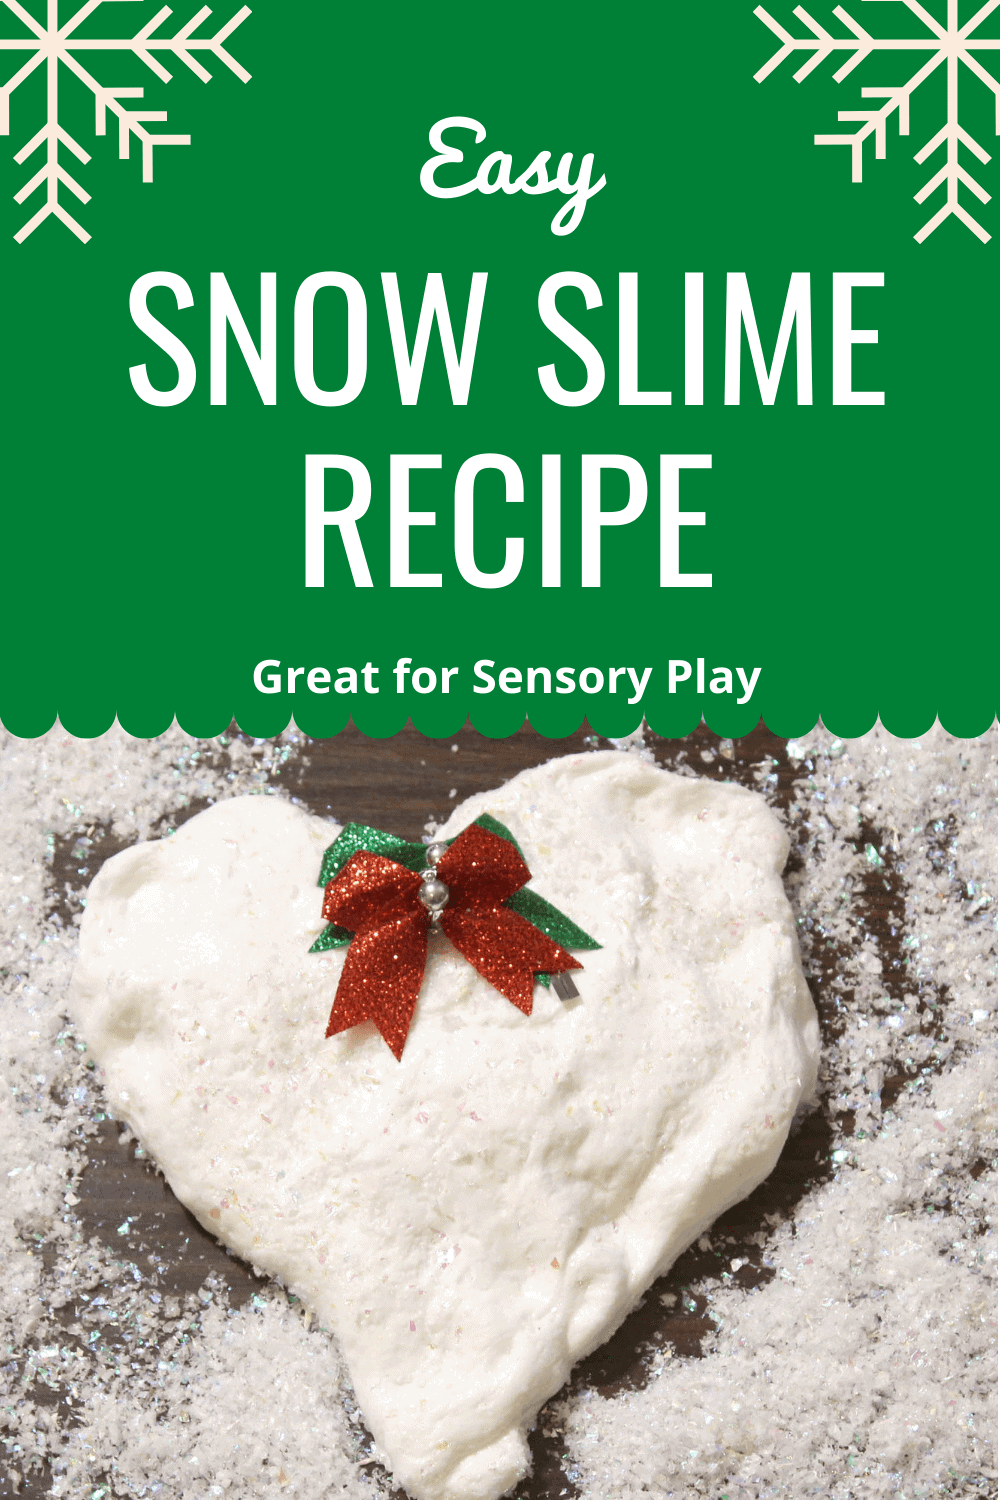 Snow slime recipe perfect as a Christmas slime recipe or as a holiday party favor idea. This snow slime is perfect for sensory play! 